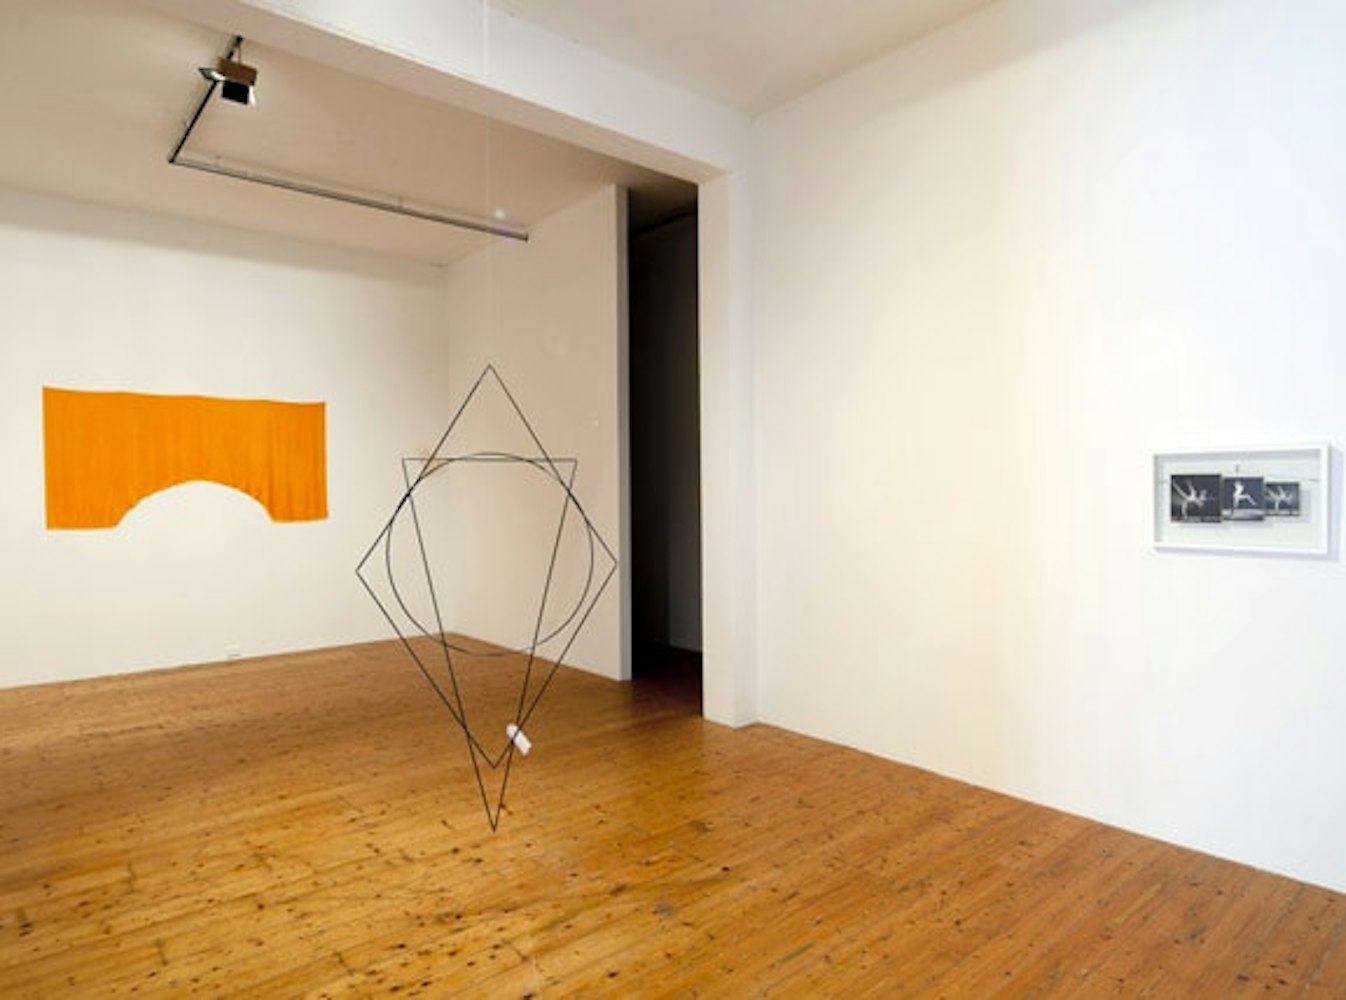 Sriwhana Spong, Fanta Silver and Song, 2011, installation at Gertrude Contemporary. Image courtesy of the Gertrude Contemporary archives.